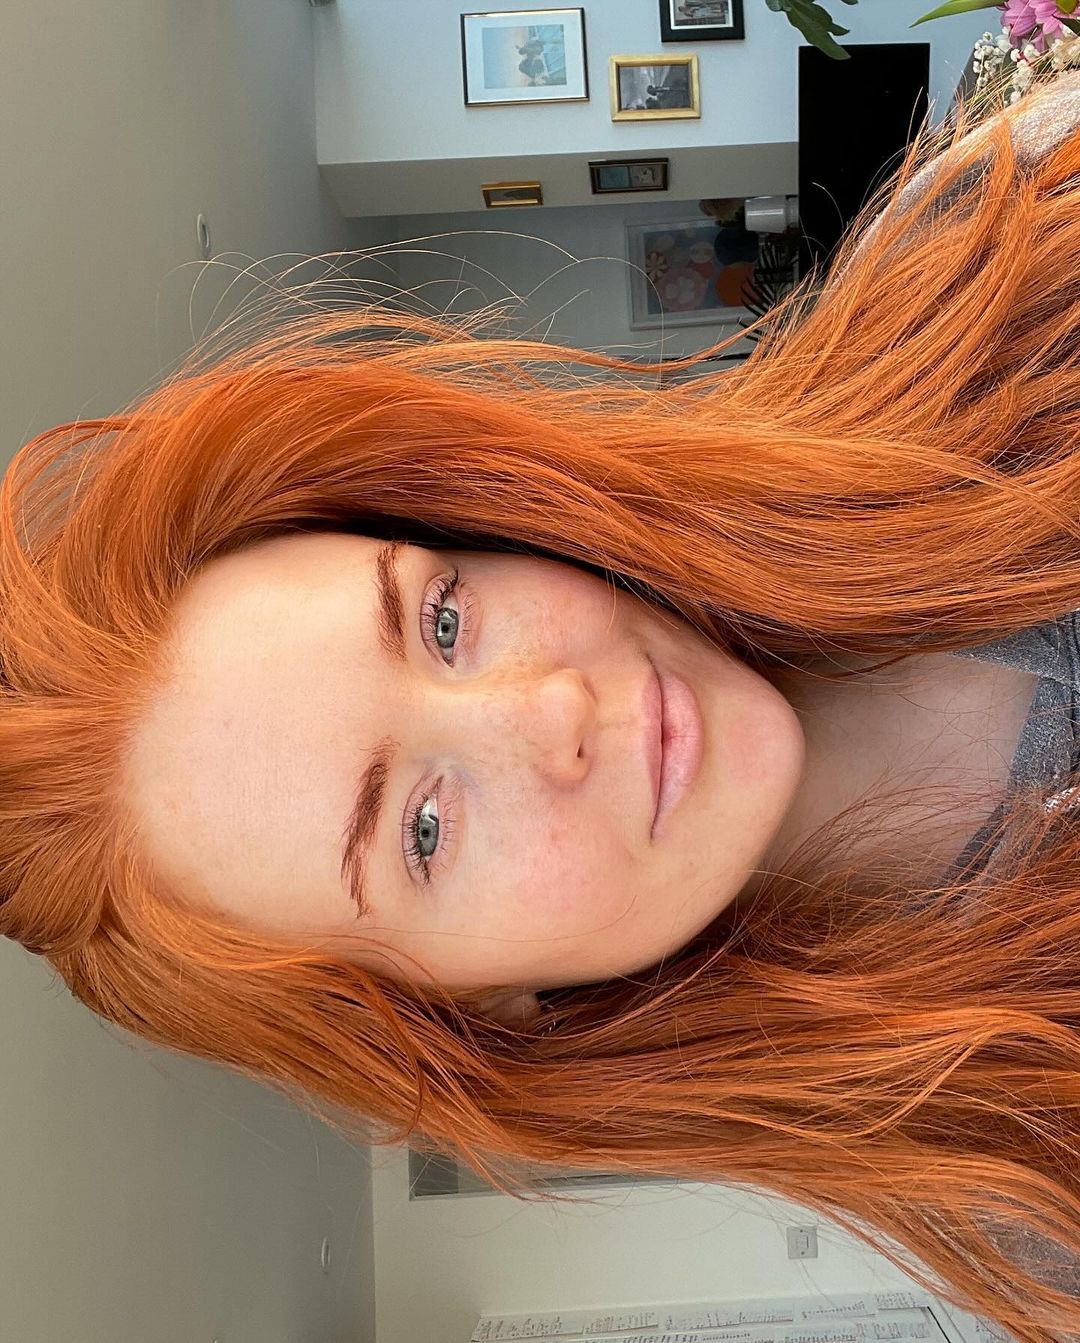 A woman with striking red hair